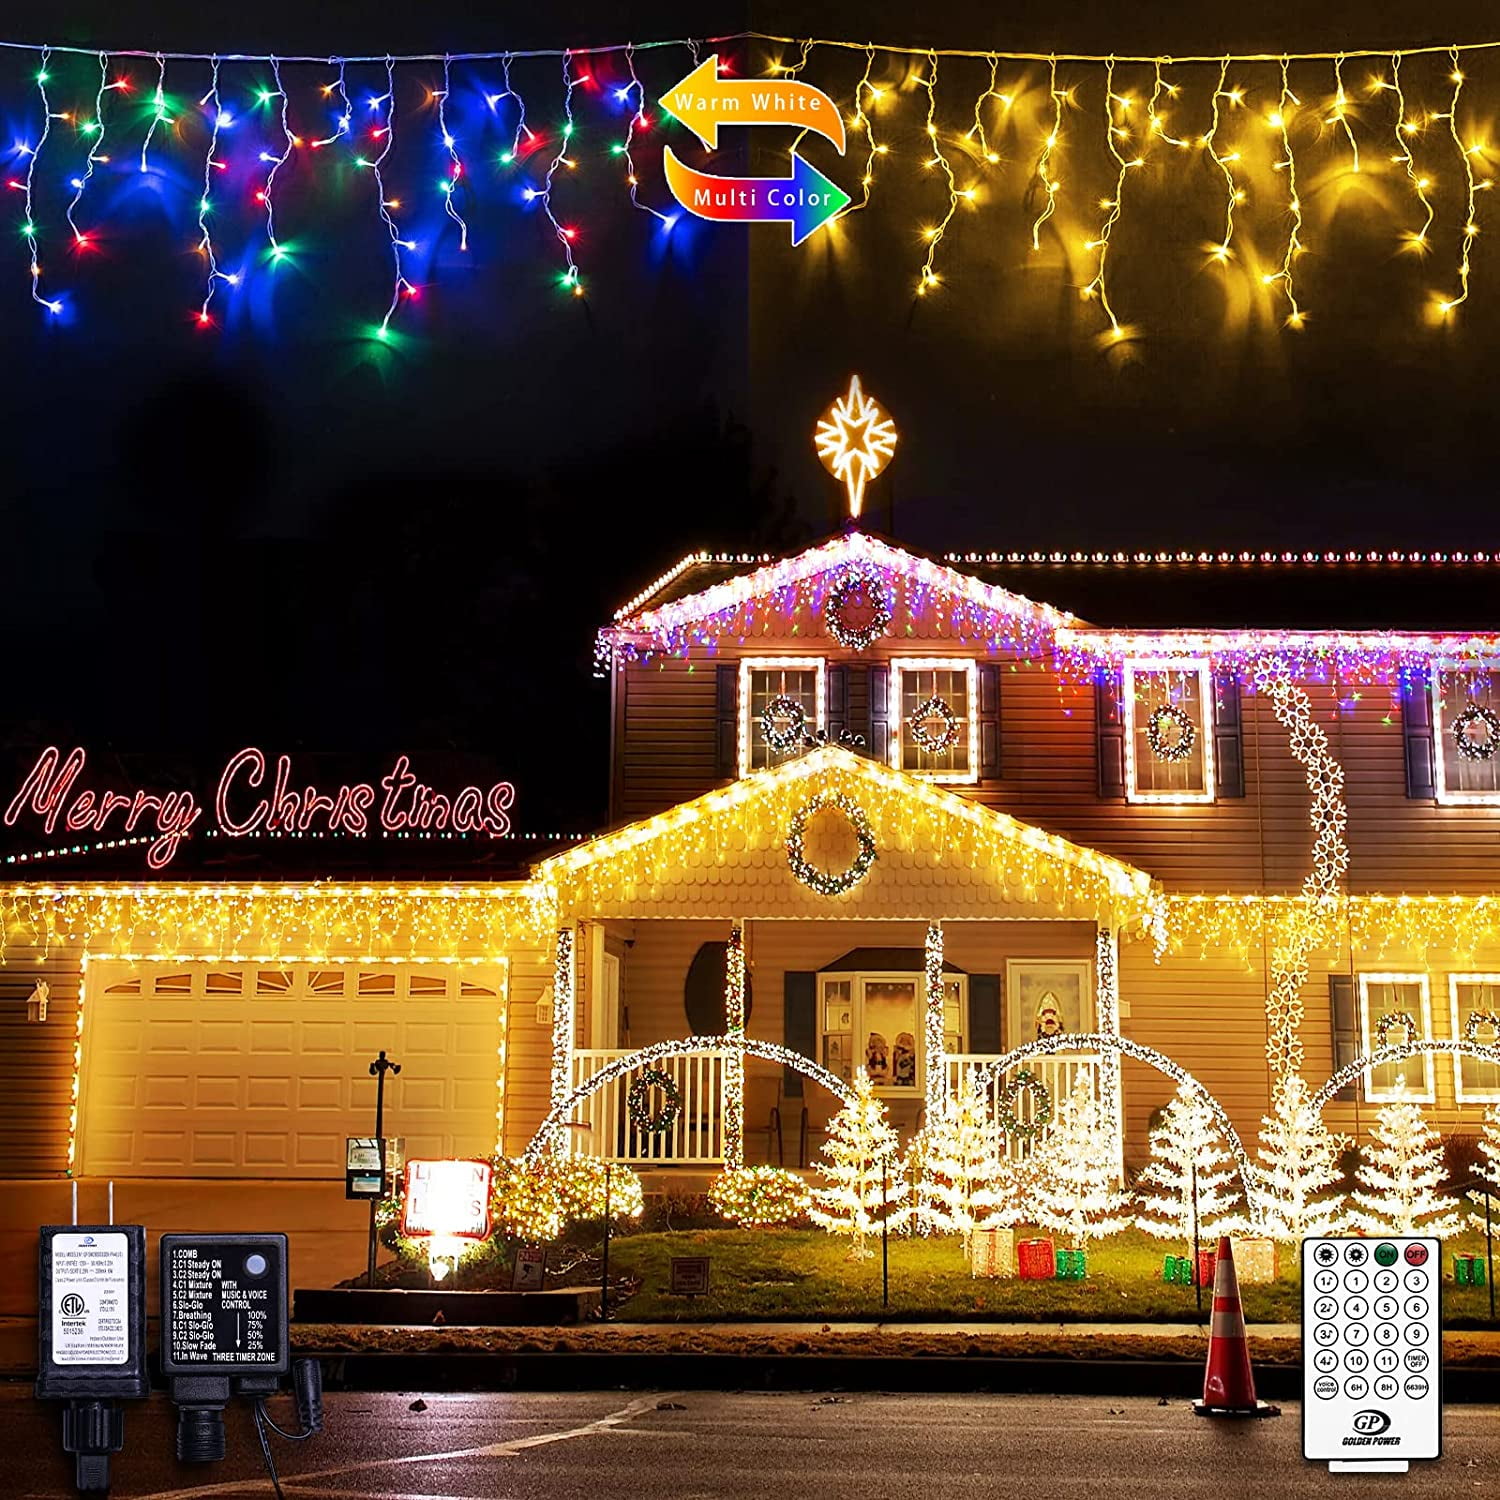 QZYL 410 FT Christmas Lights Outdoor, 1000 LED Long Blue Christmas Lights  Decorations, Waterproof Ch…See more QZYL 410 FT Christmas Lights Outdoor